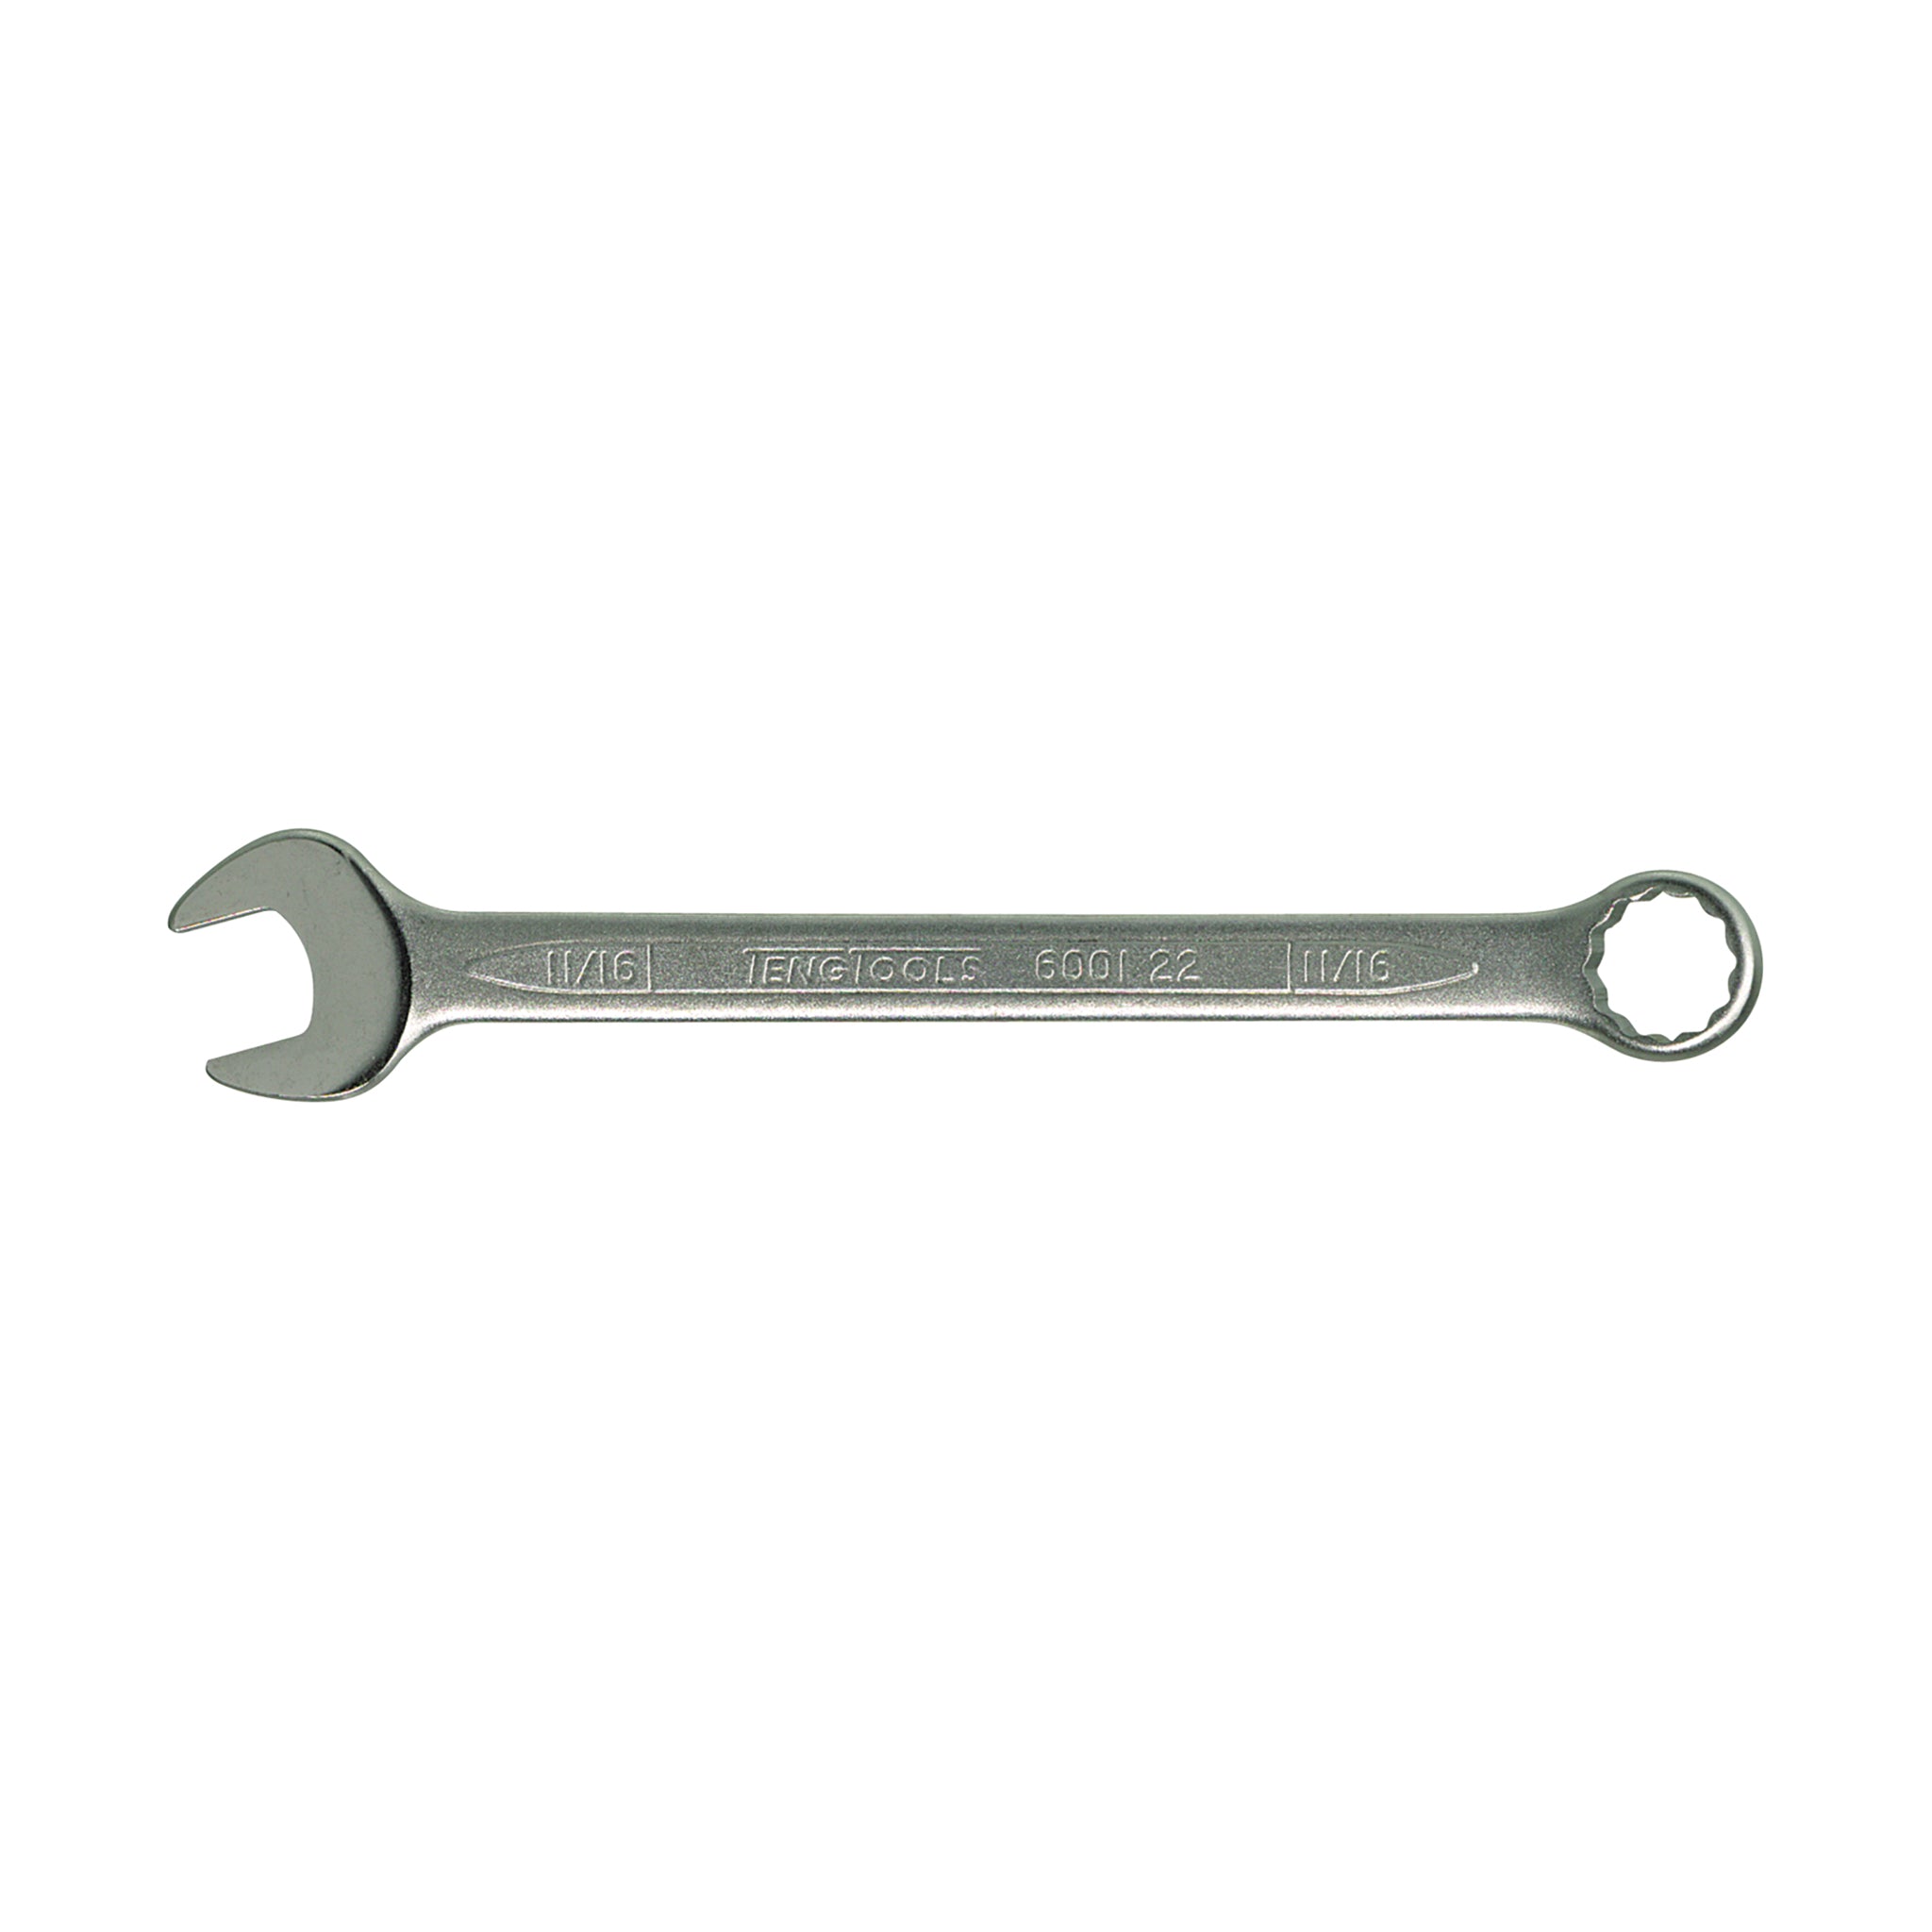 Standard Combination SAE Wrenches Made With Chrome Vanadium Steel - 1-5/16